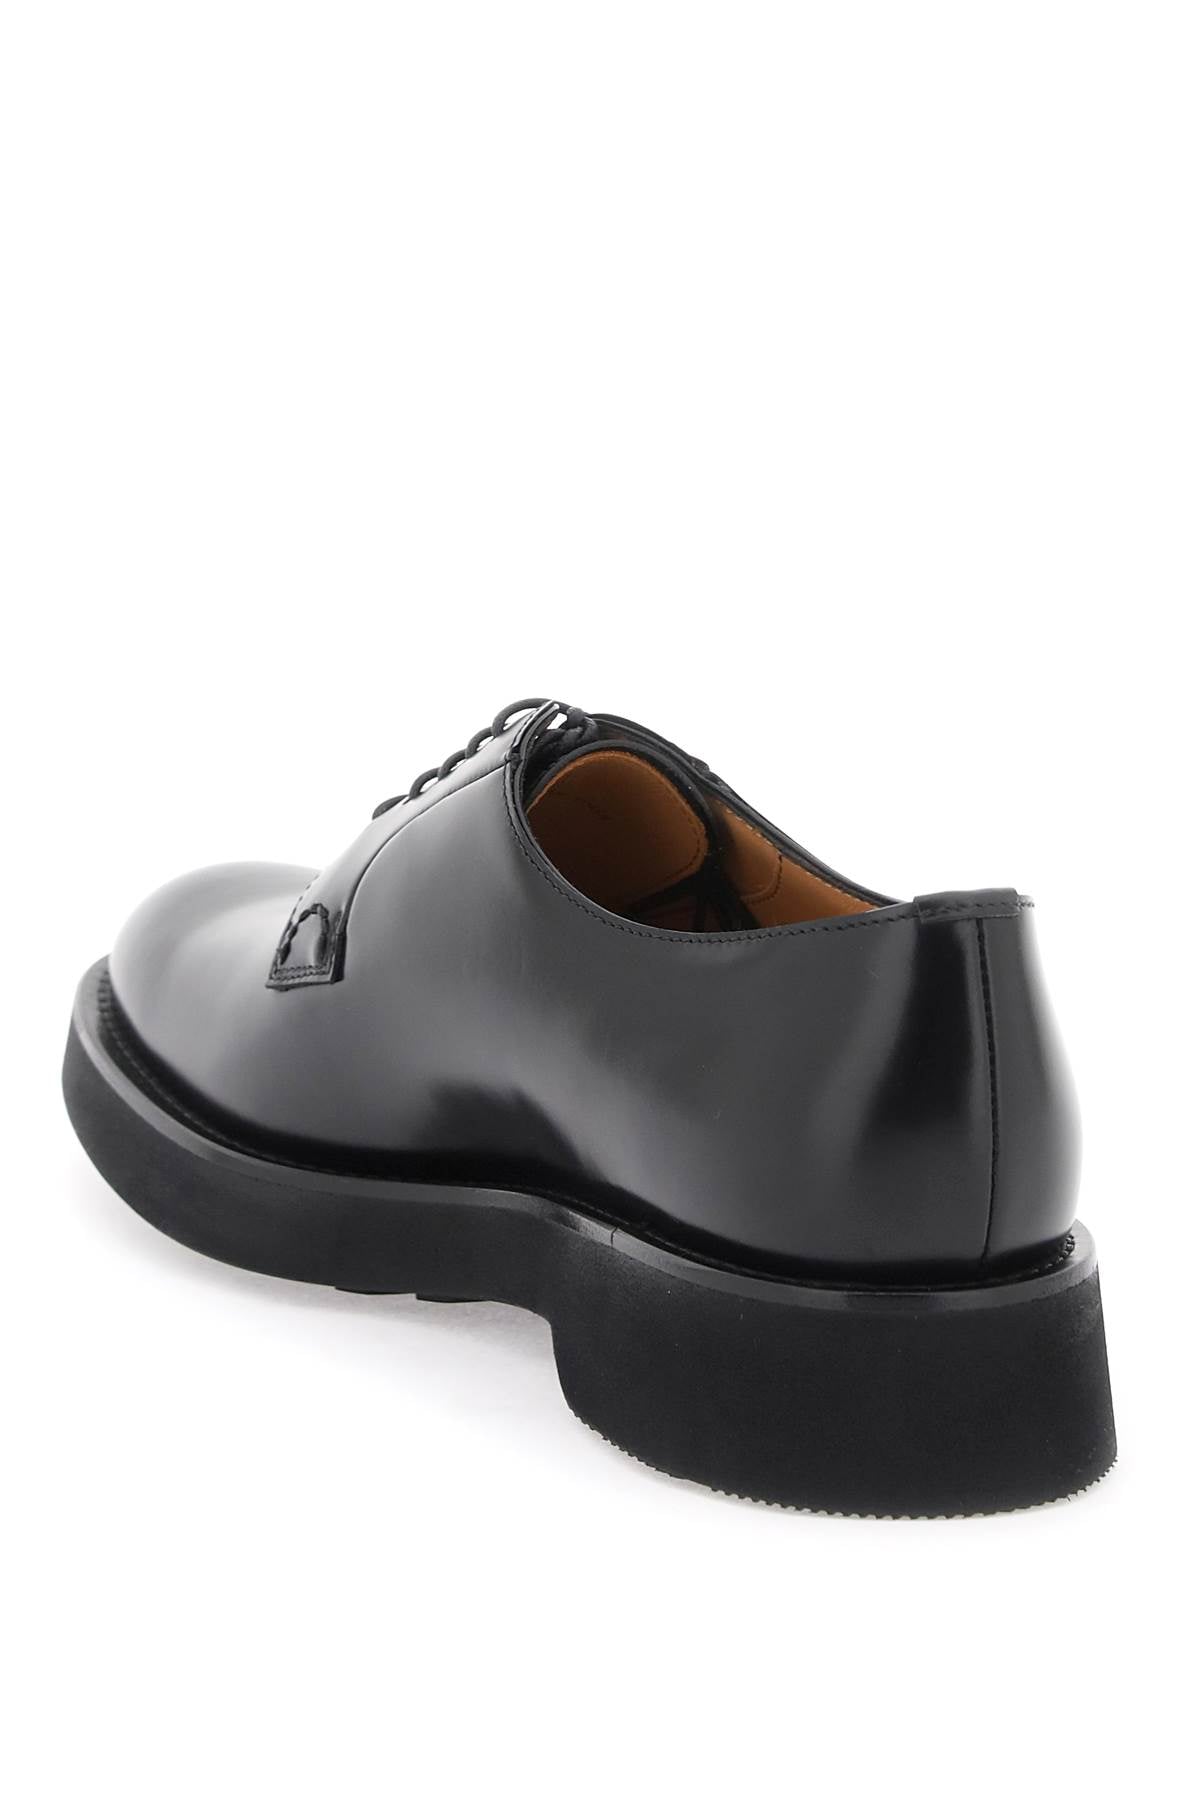 Church's leather shannon derby shoes-2